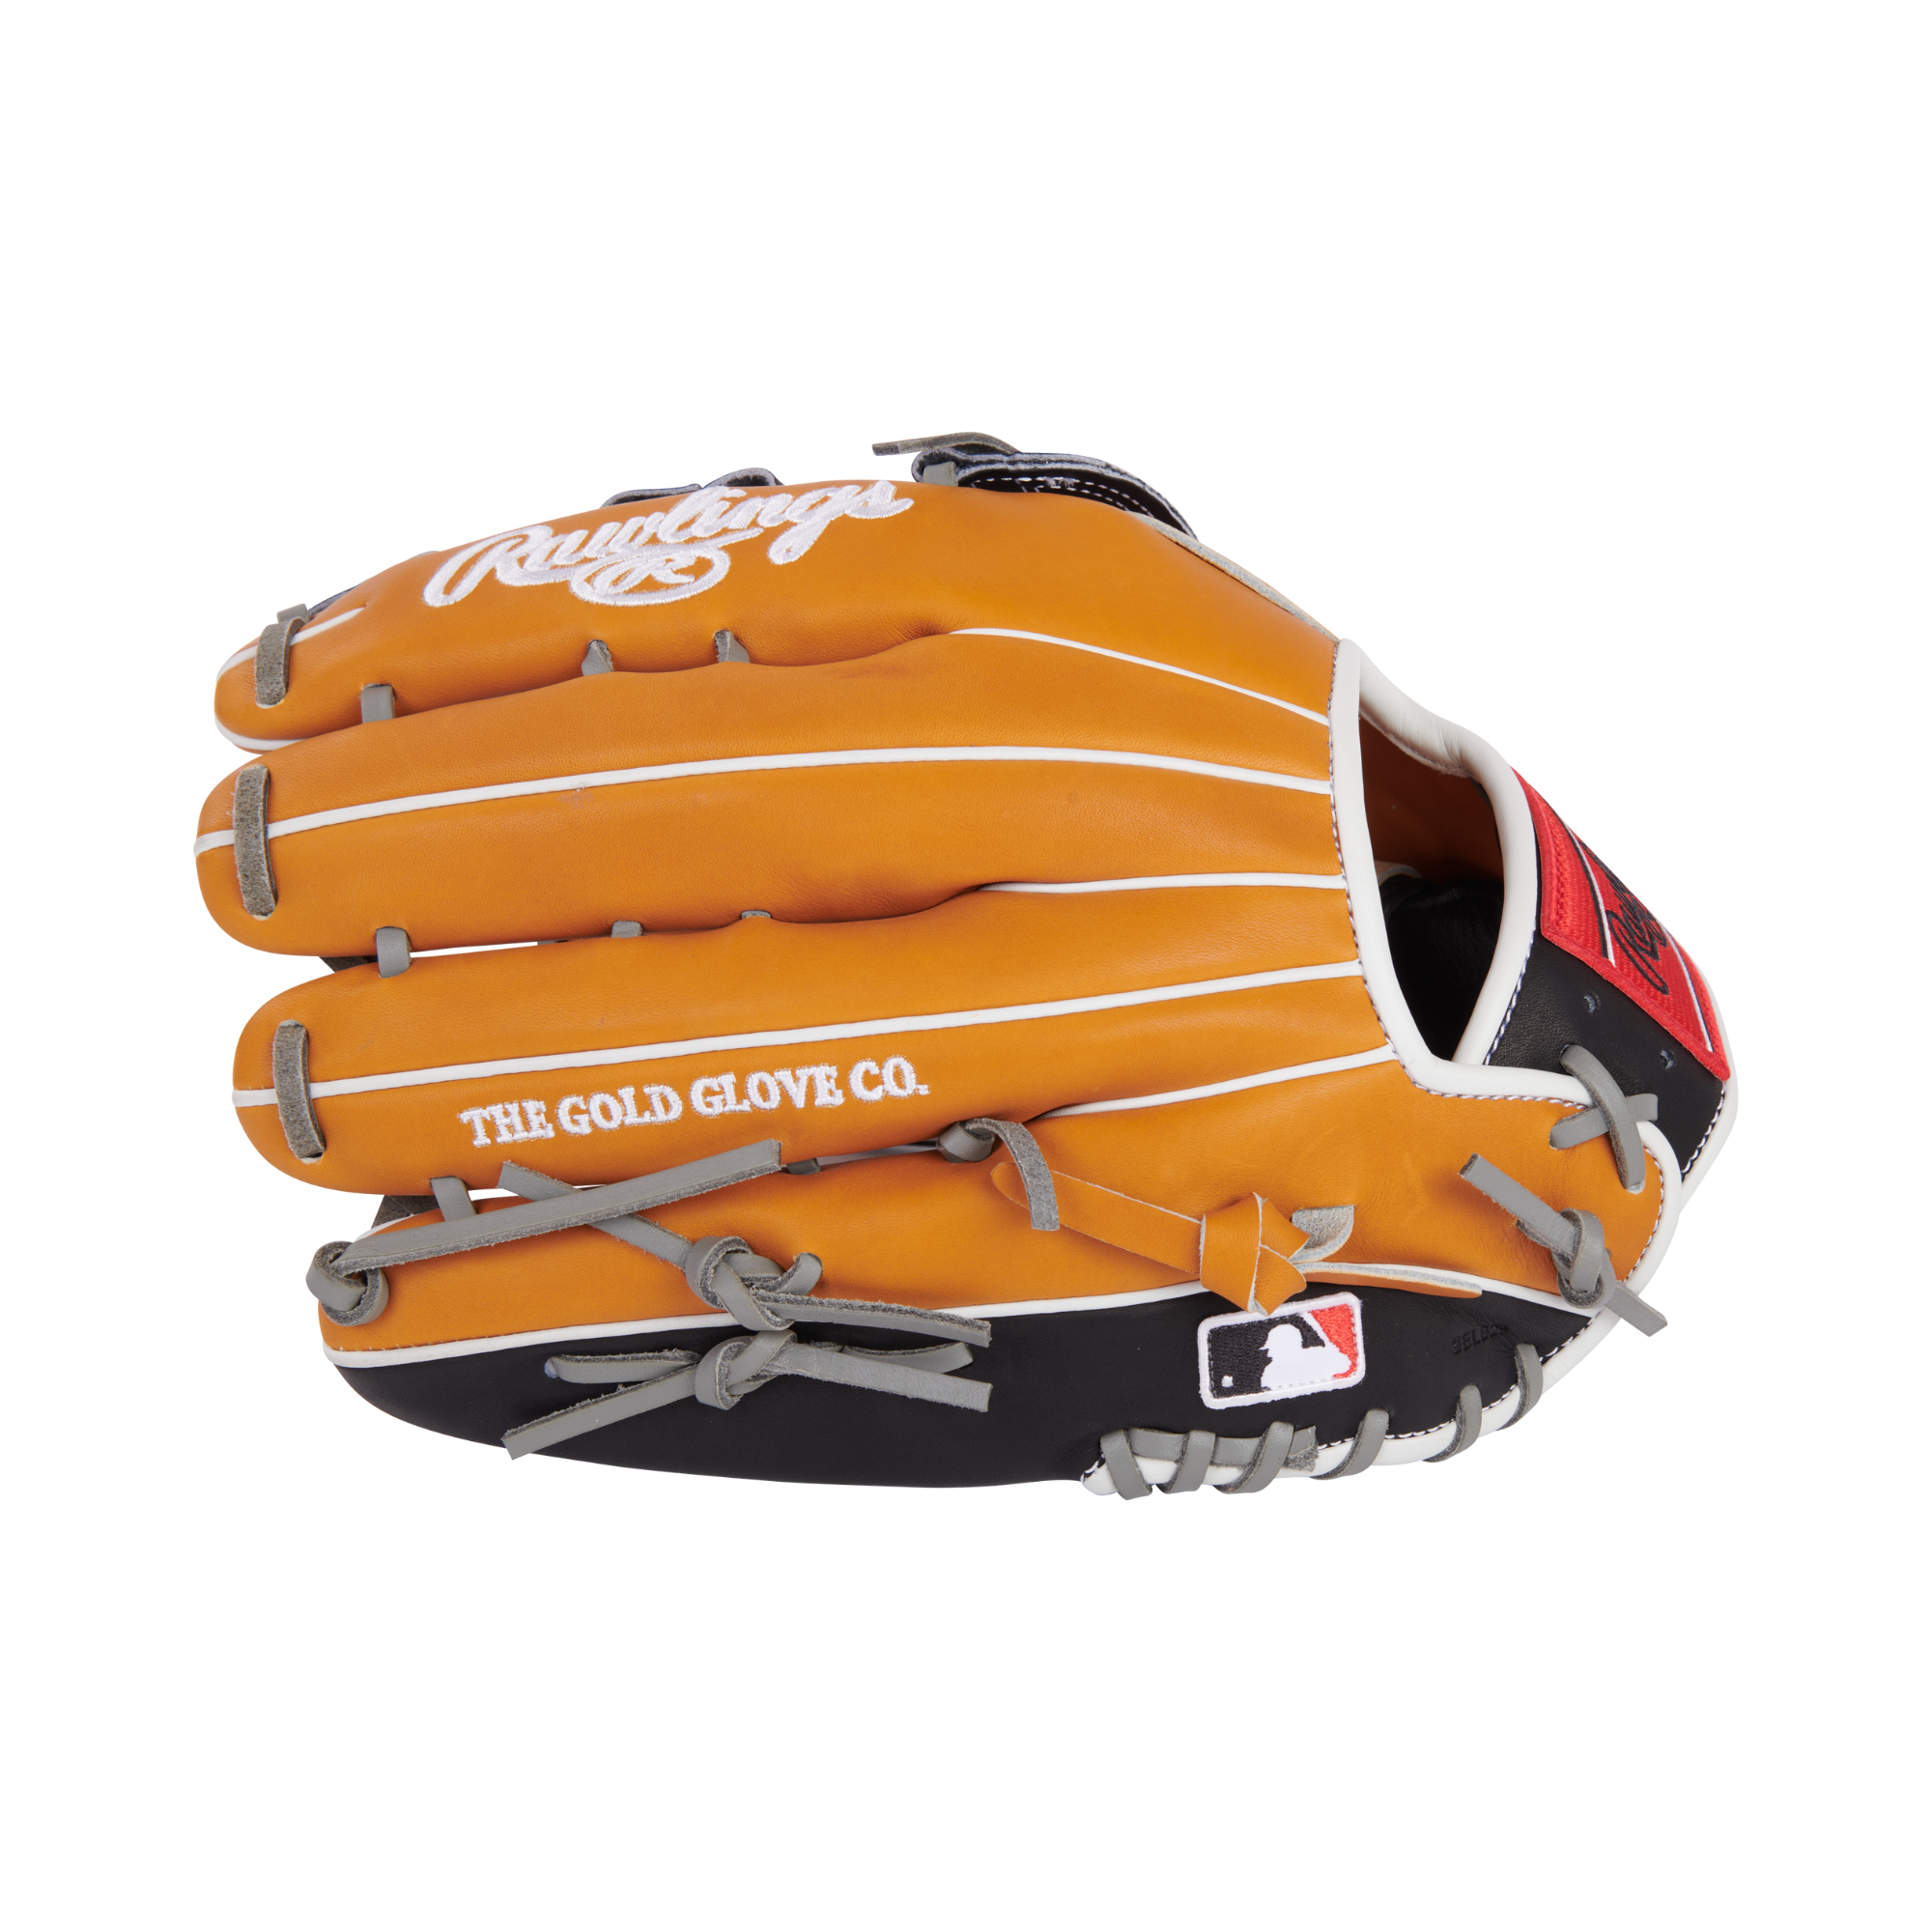 Rawlings August 2022 Gold Glove Club RGGC (GOTM) 12.75 inch Outfield Heart of the Hide